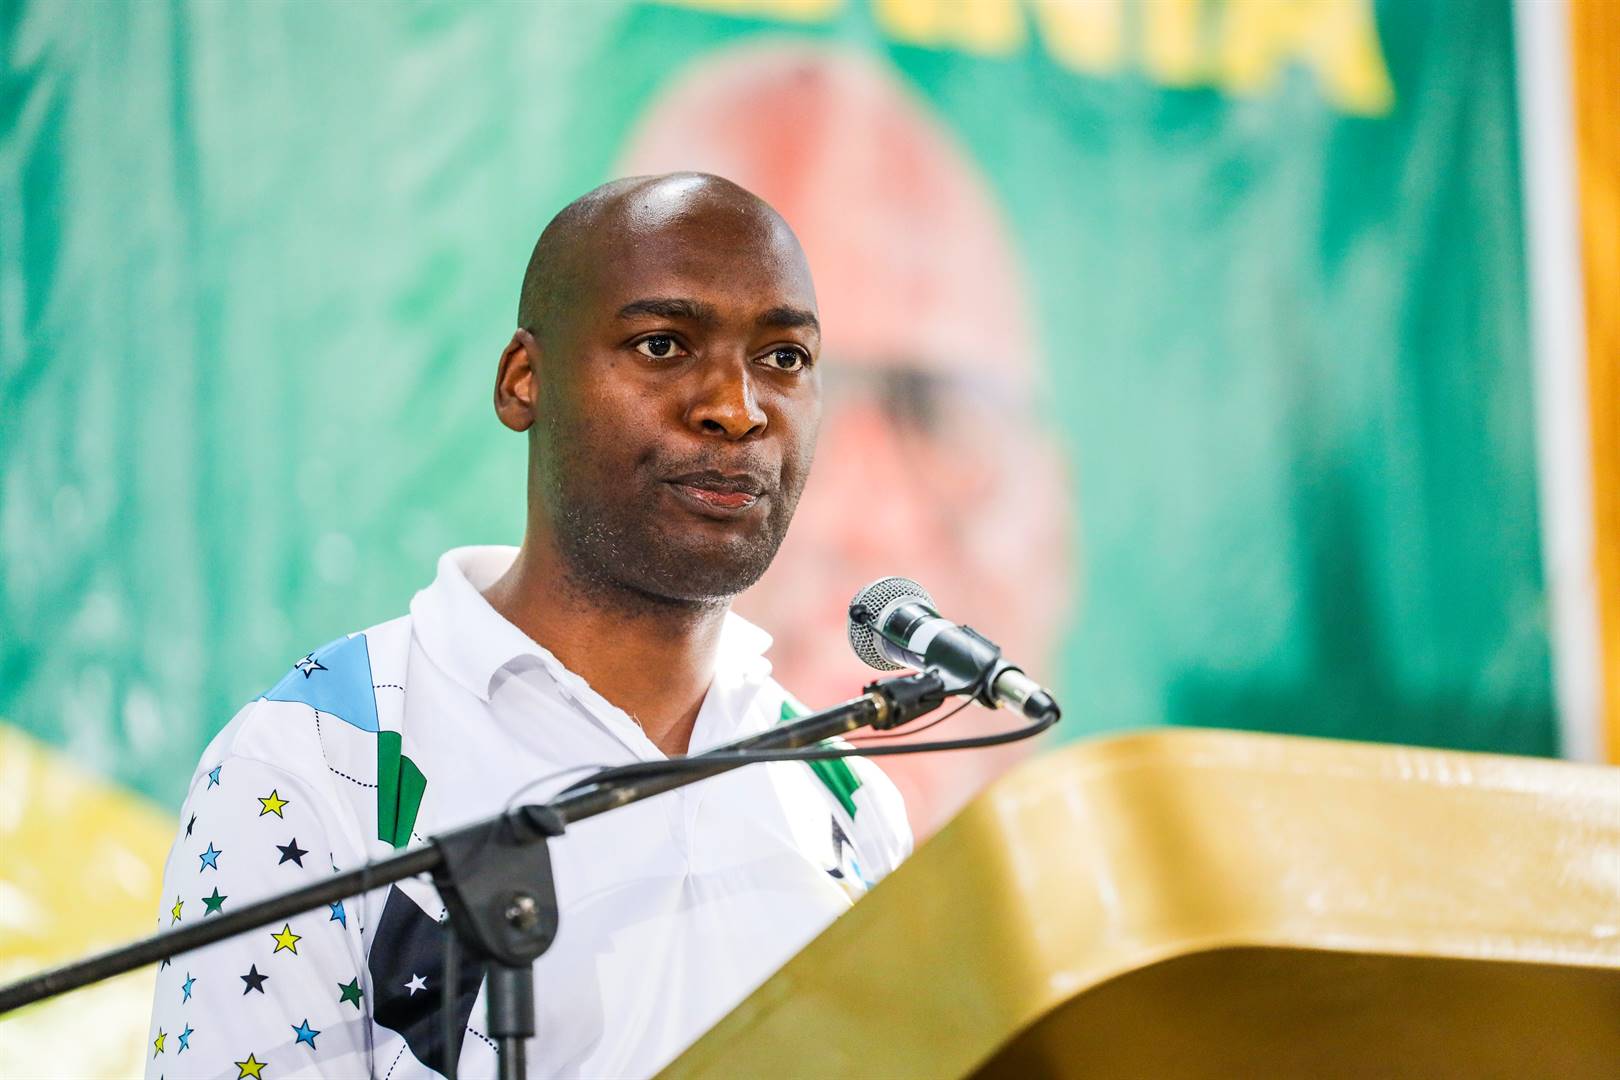 Vuyo Zungula, says he has received several death threats and the party’s offices were burgled